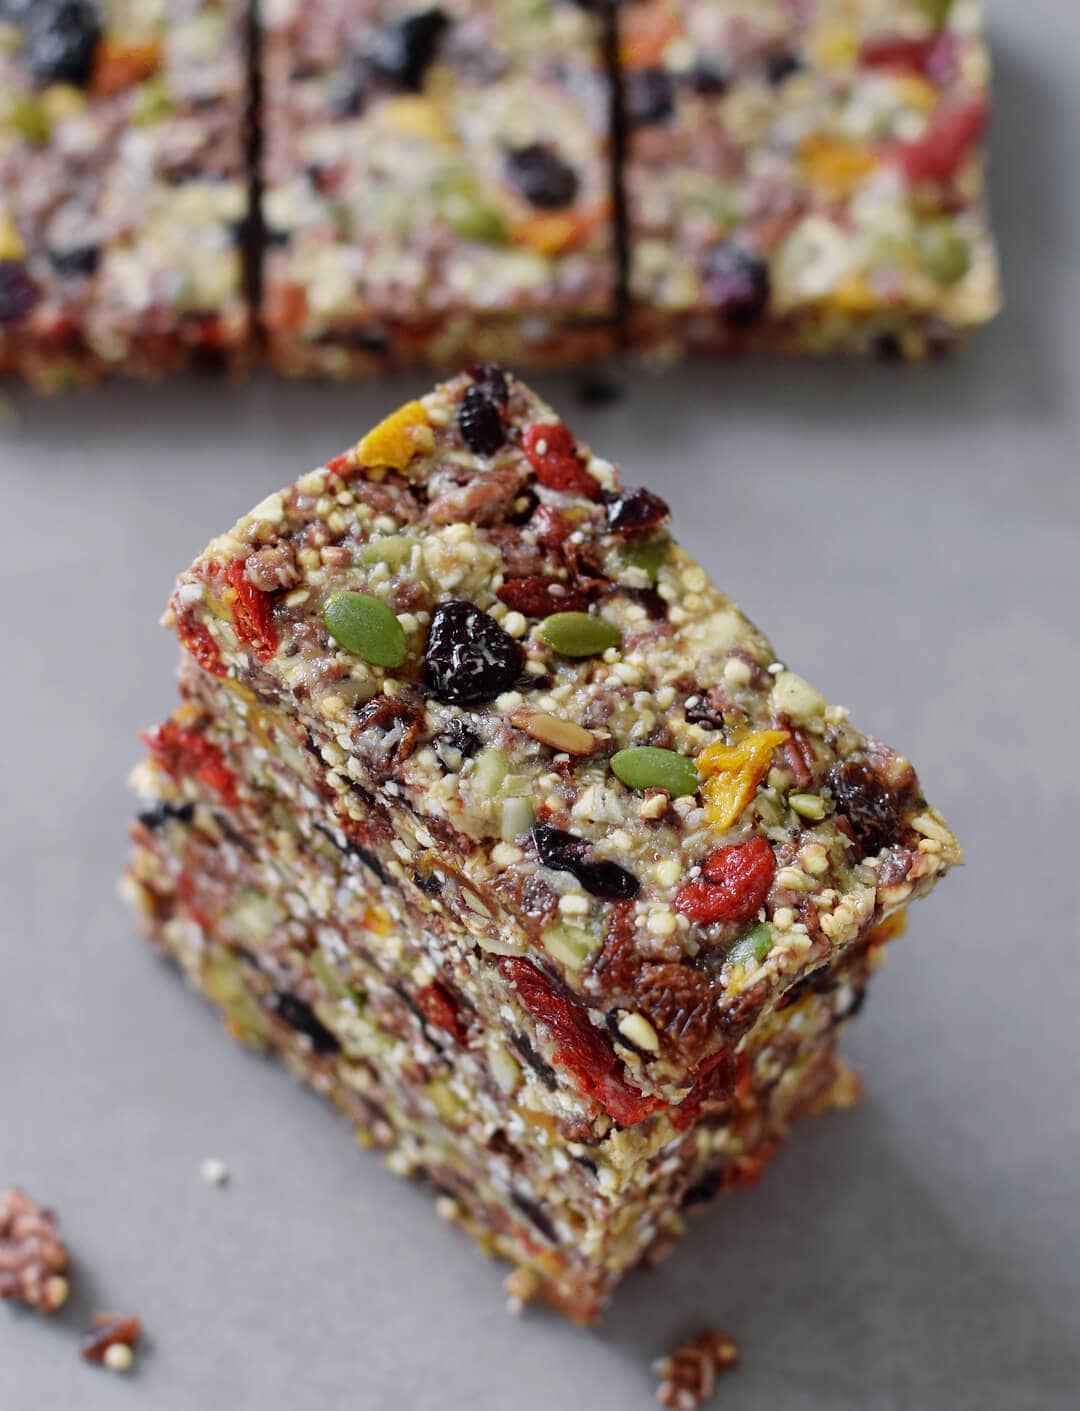 Healthy granola bars recipe. These muesli bars are chewy, soft and the perfect snack. My recipe is (raw) vegan, gluten free, refined sugar-free, healthy and easy to make